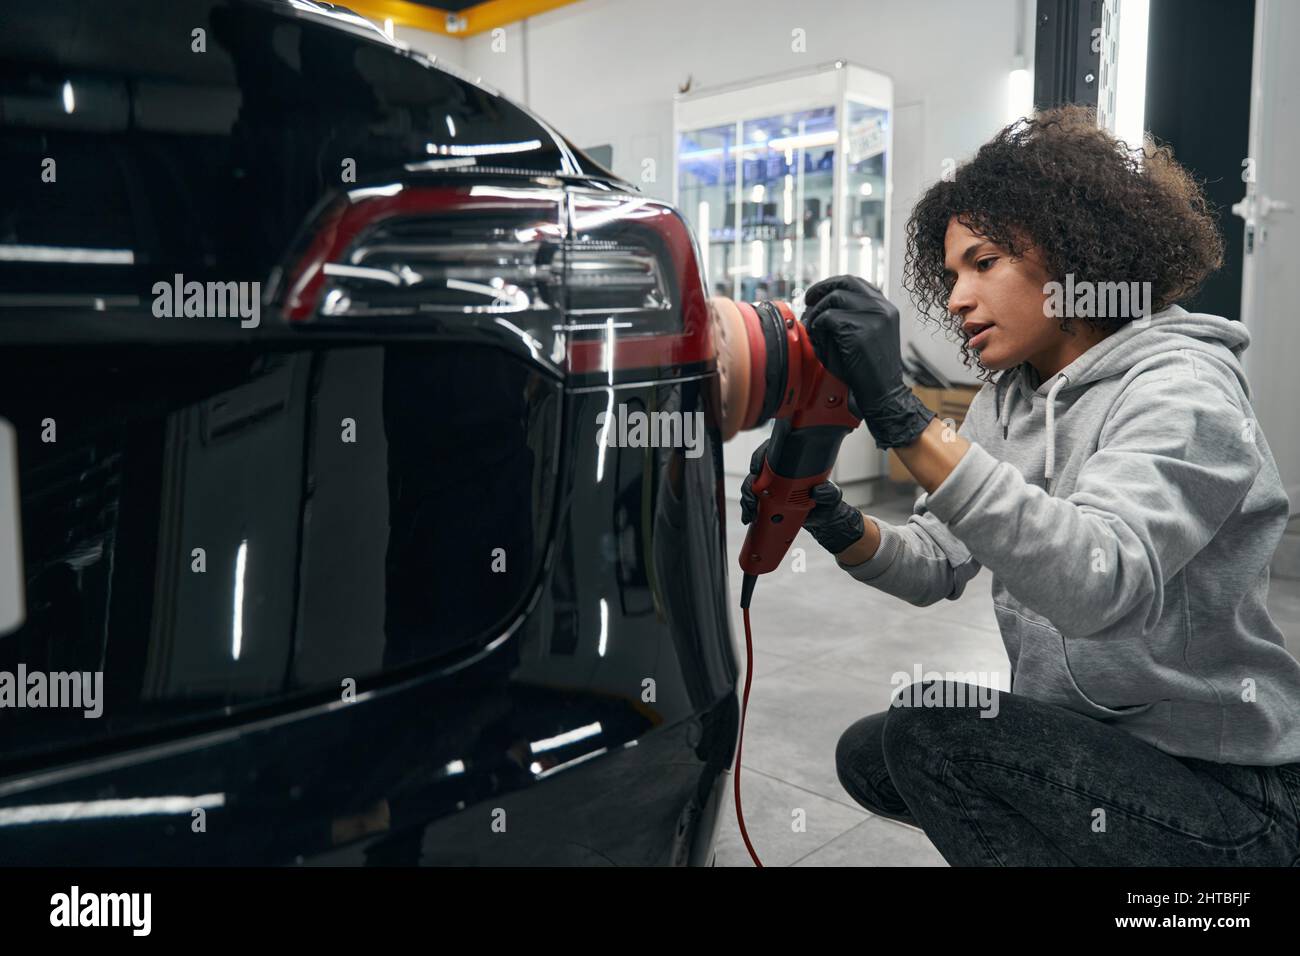 Experienced worker buffing motor vehicle with polisher Stock Photo